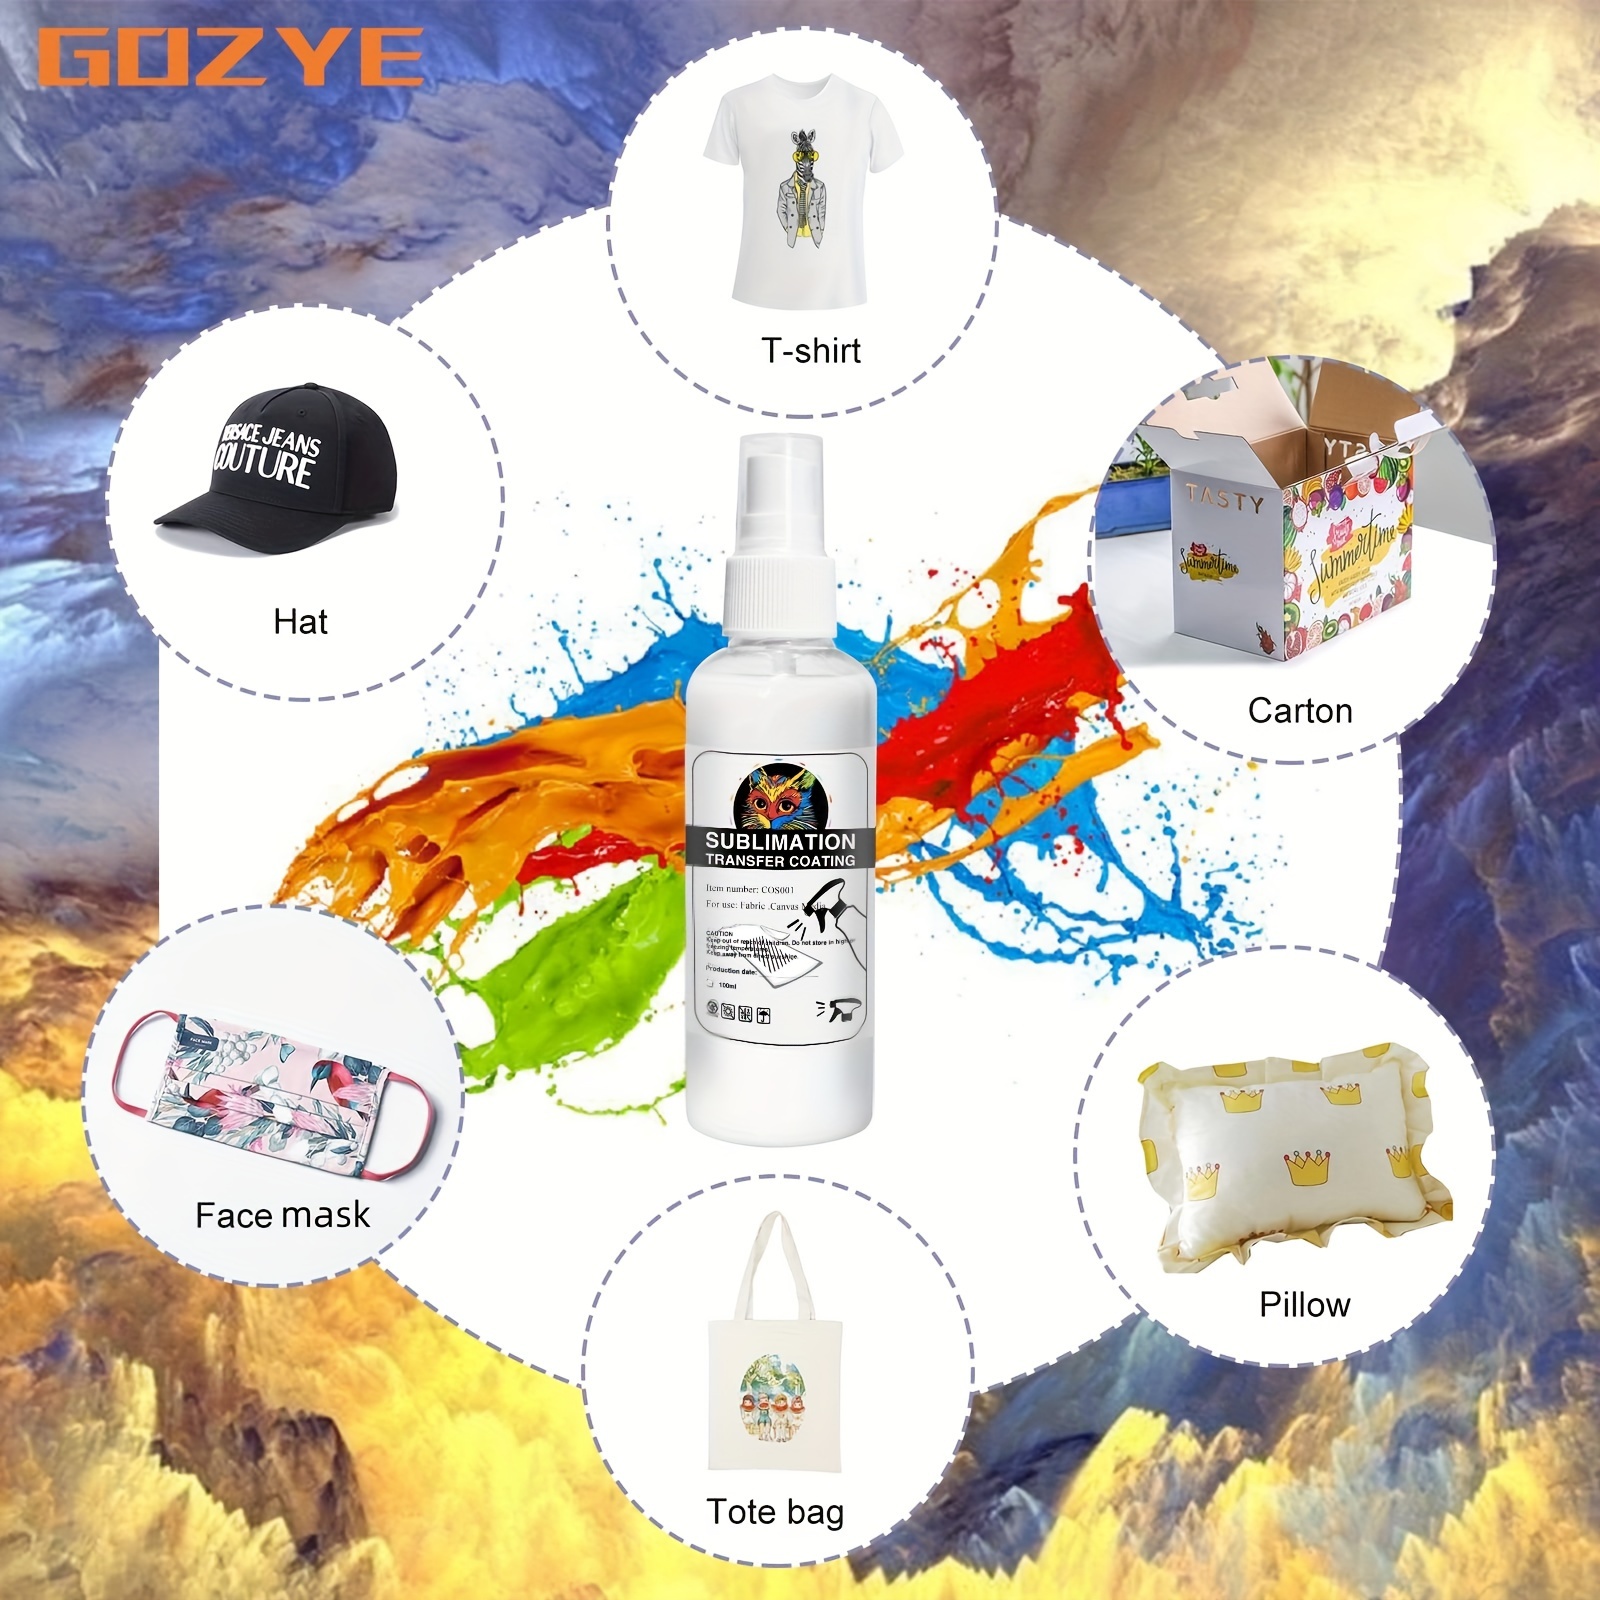 Sublimation Spray, Sublimation Spray for Cotton Shirts, Sublimation Coating Spray Apply All Fabric, Sublimation Spray for Cotton Quick Dry & Super